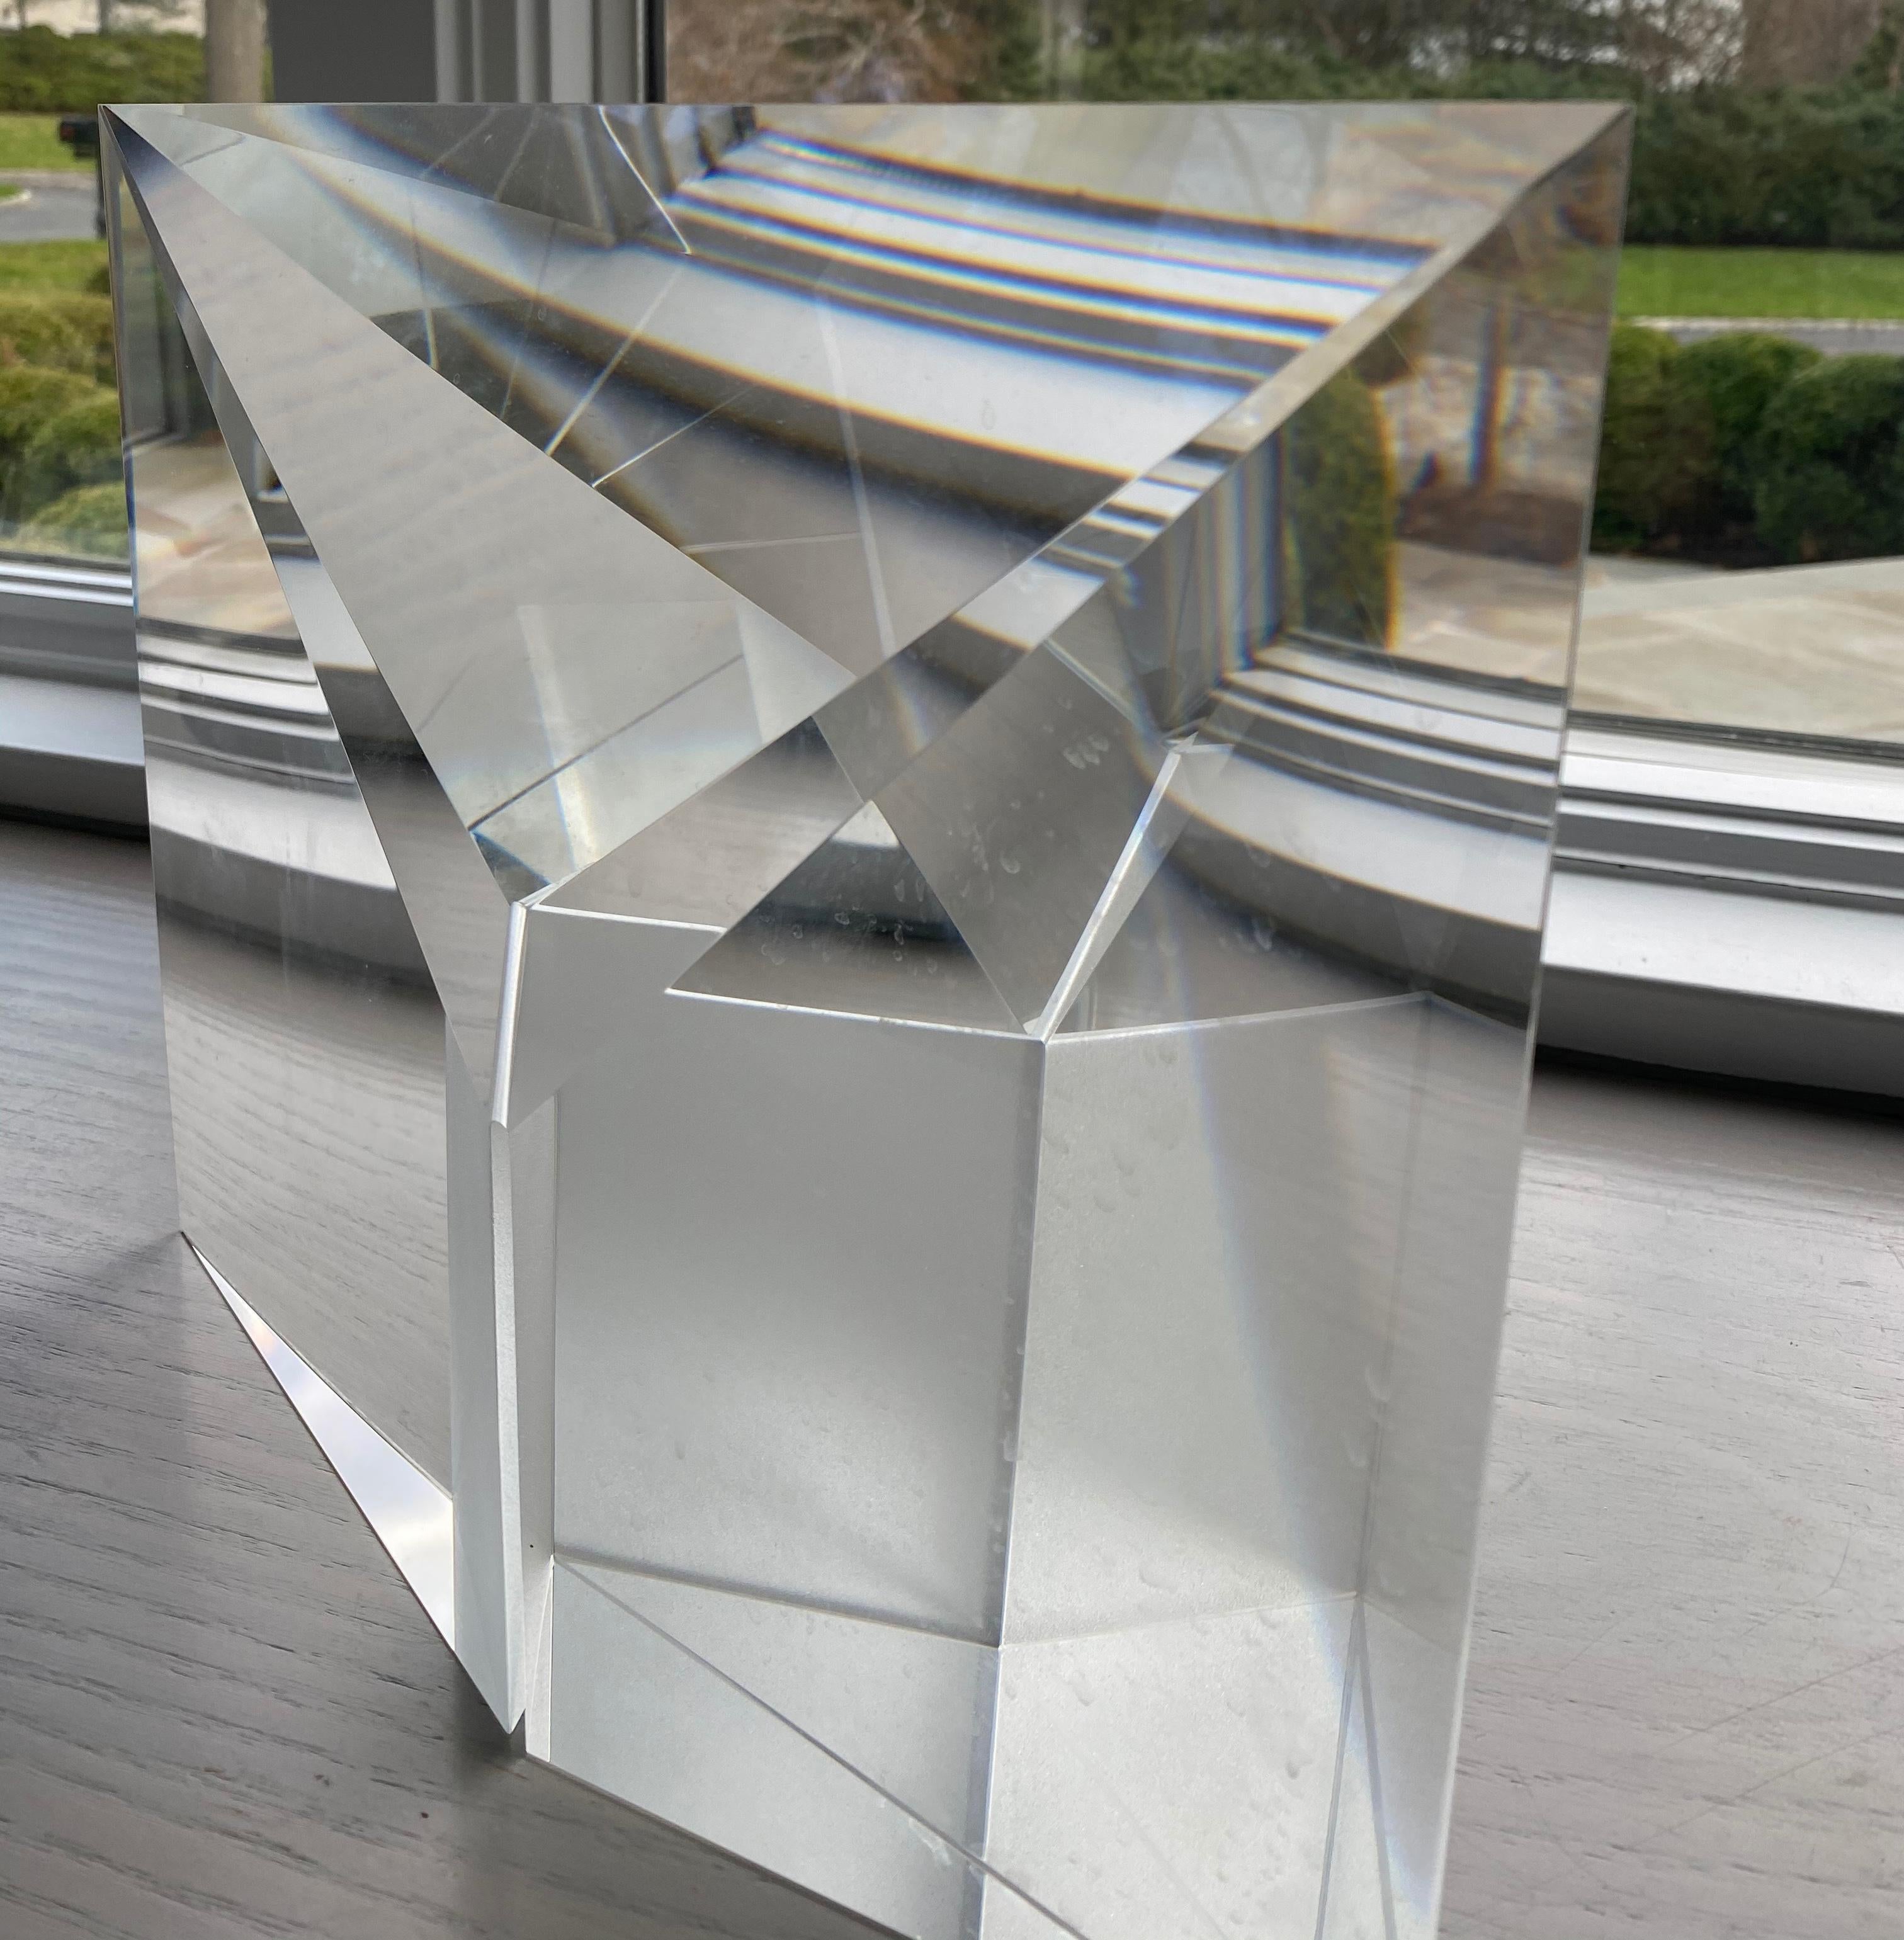 This abstract optic glass sculpture created by Czech artist Tomas Brzon is noteworthy for its crystal clear color and purity. As the viewer gazes into the piece, different shapes and colors will appear created by the cut contours of the sculpture.